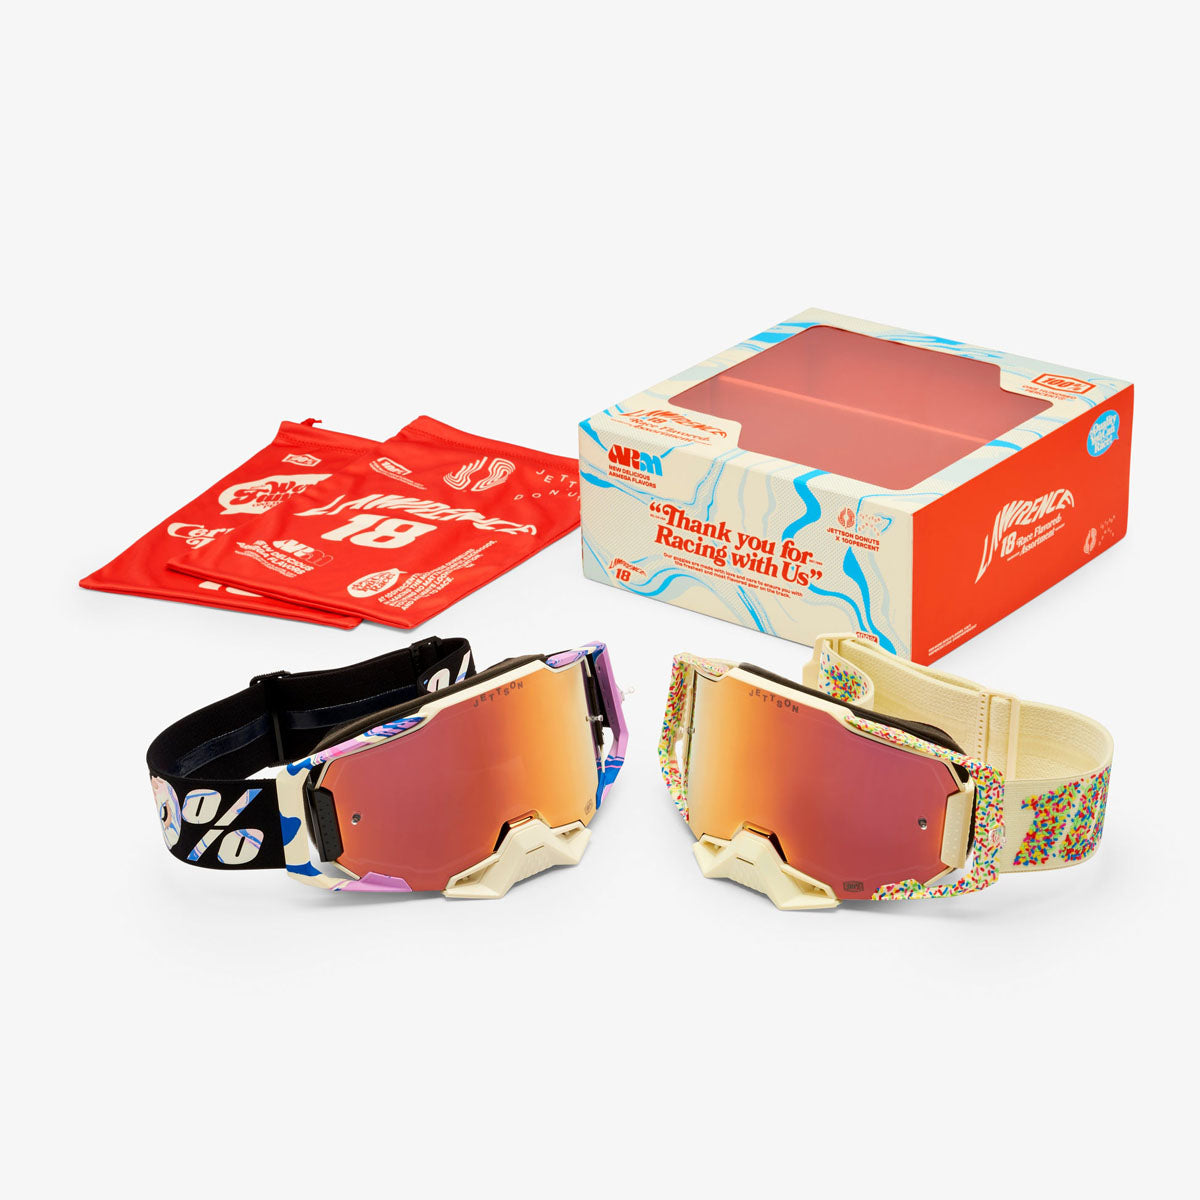 100% Armega Goggles - Jett Lawrence Donuts 2 Pack 2 Pack Donuts